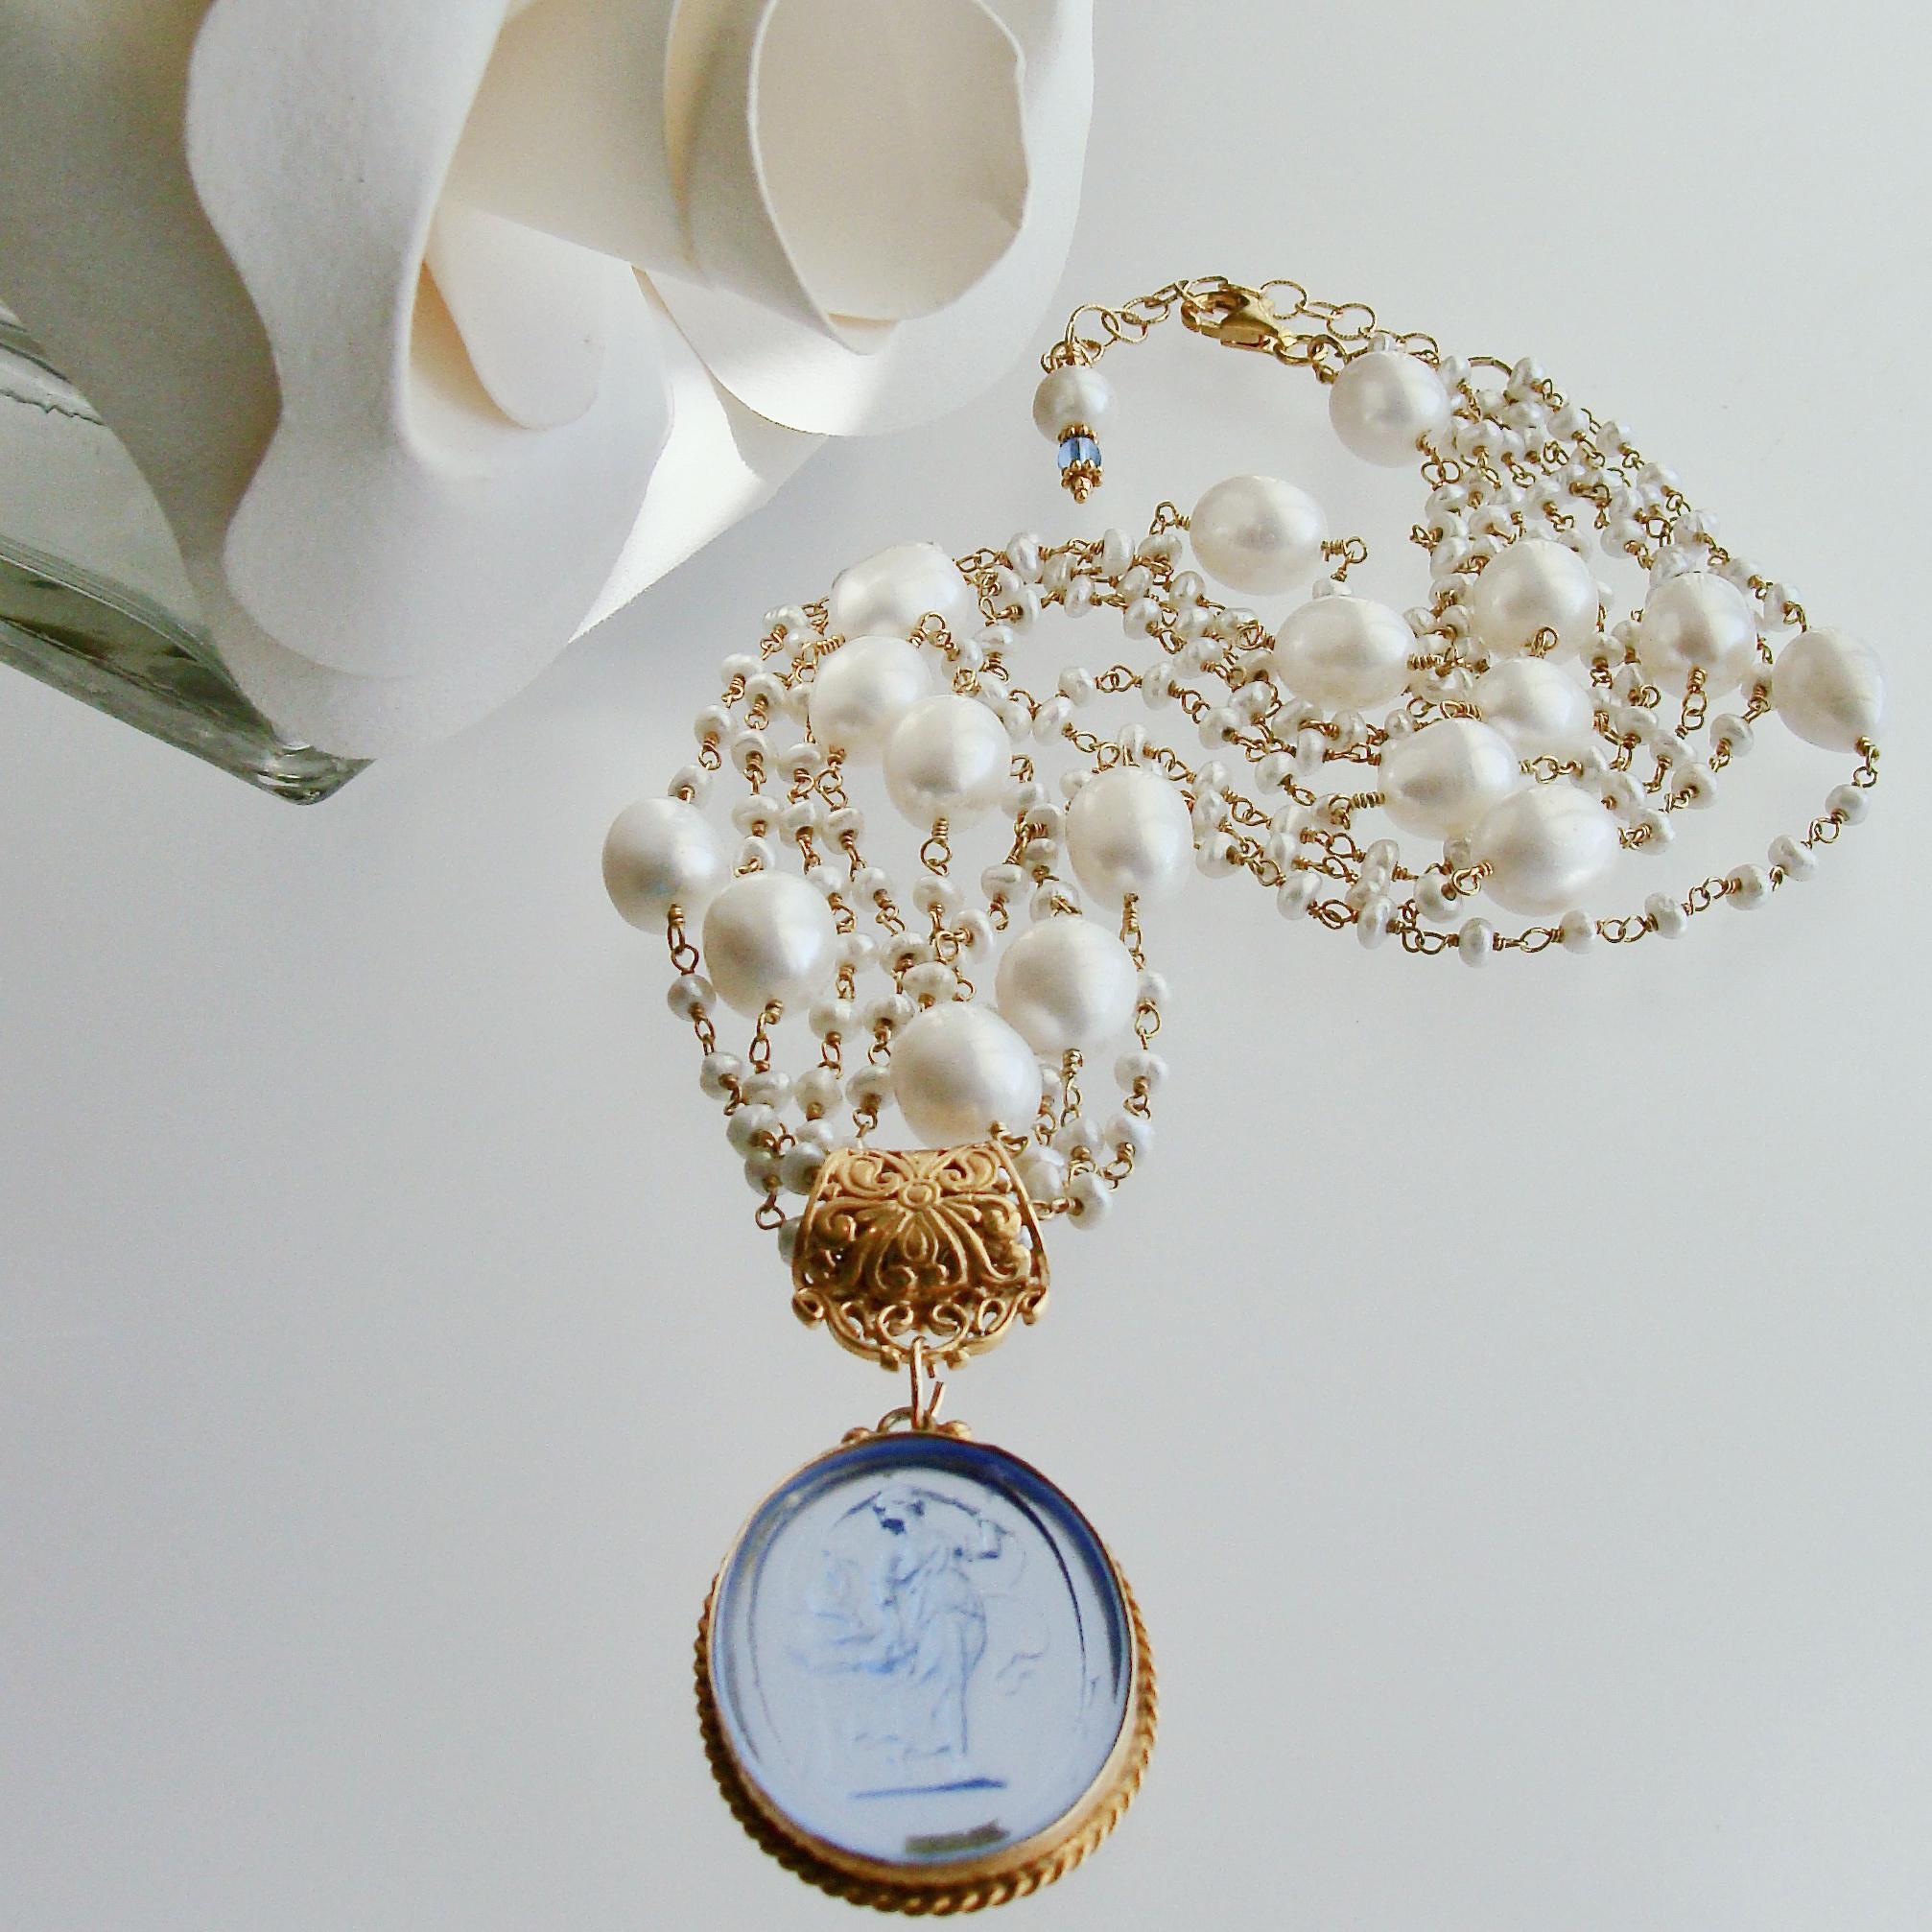 The elegant beauty of simple strands of hand-linked creamy satin seed pearls, intercepted by larger baroque pearls, is the perfect compliment to this neoclassical cornflower blue Venetian glass cameo/intaglio pendant.  The adjustable closure allows